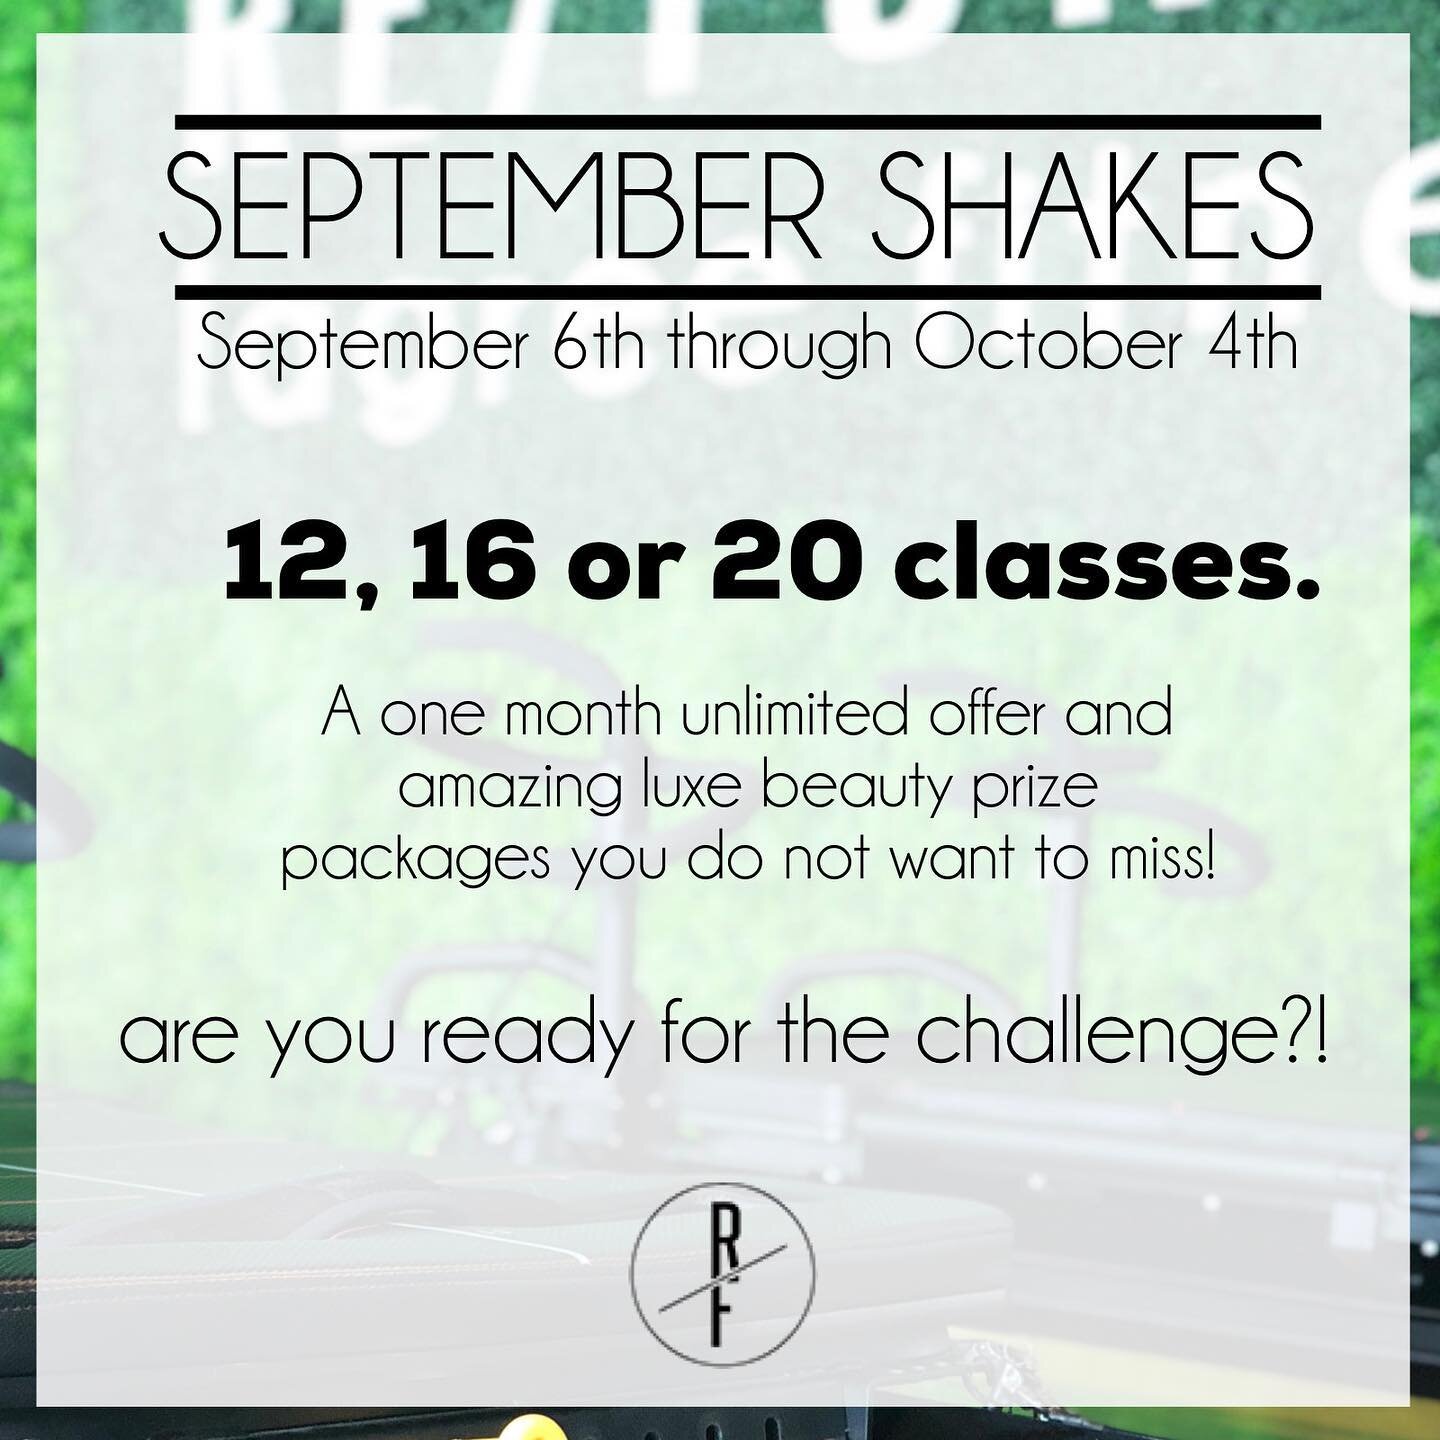 It is time to kick it back in to gear and no better way than with a fitness challenge. Best thing is, YOU can pick your goal.&nbsp;
Here are the details:&nbsp;
-Challenge runs September 6th through October 4th
-Take 12 classes and you are entered to 